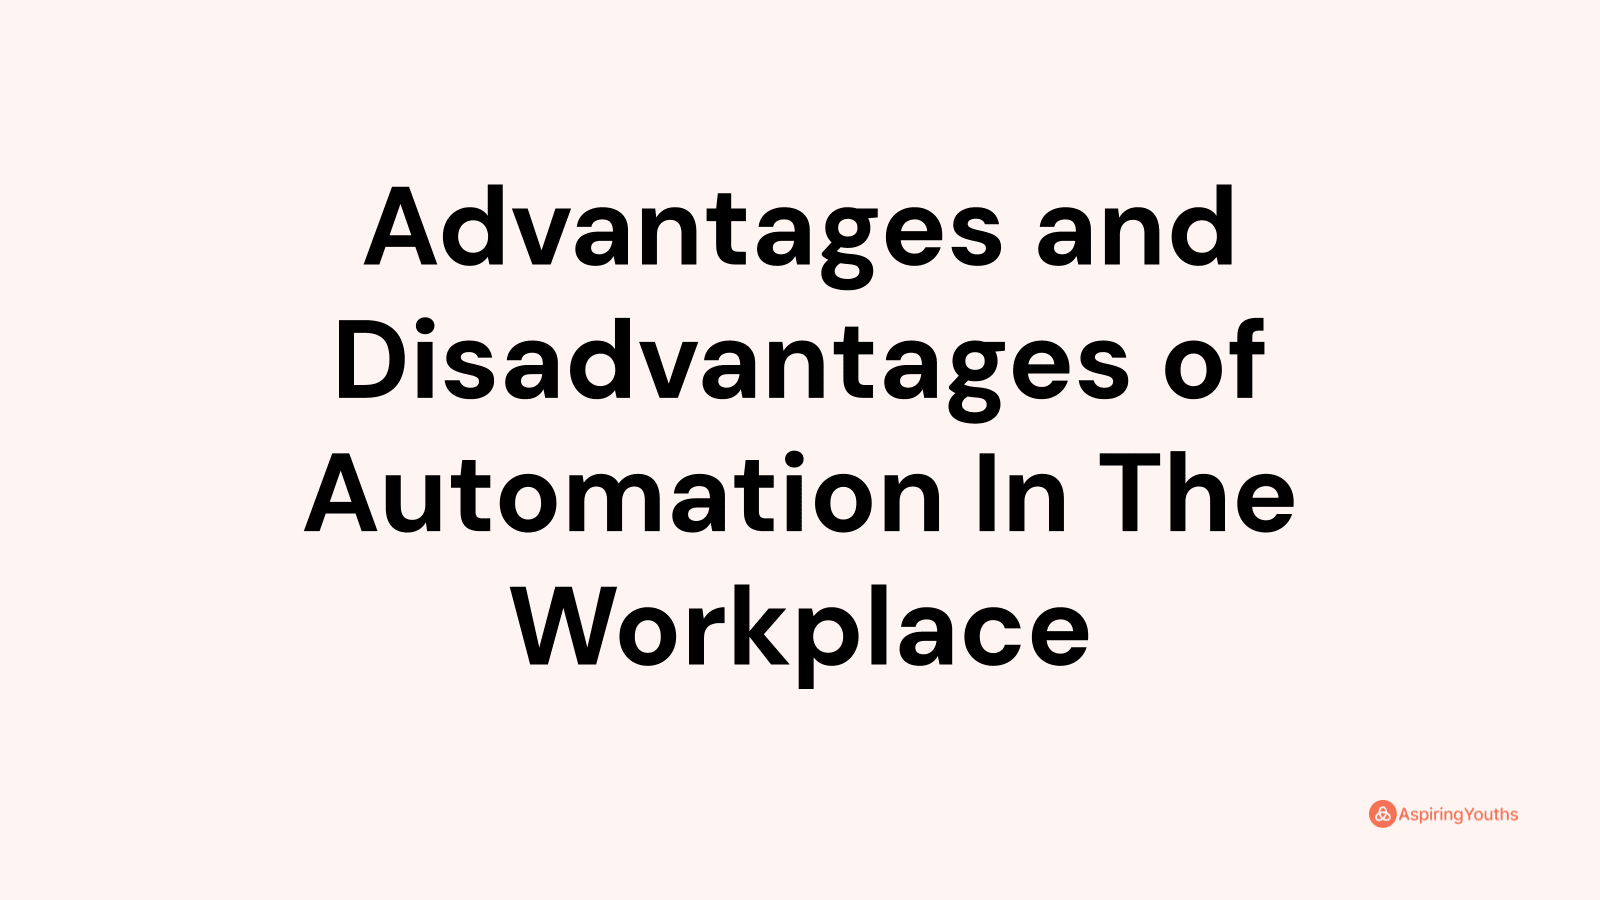 Advantages and disadvantages of Automation In The Workplace